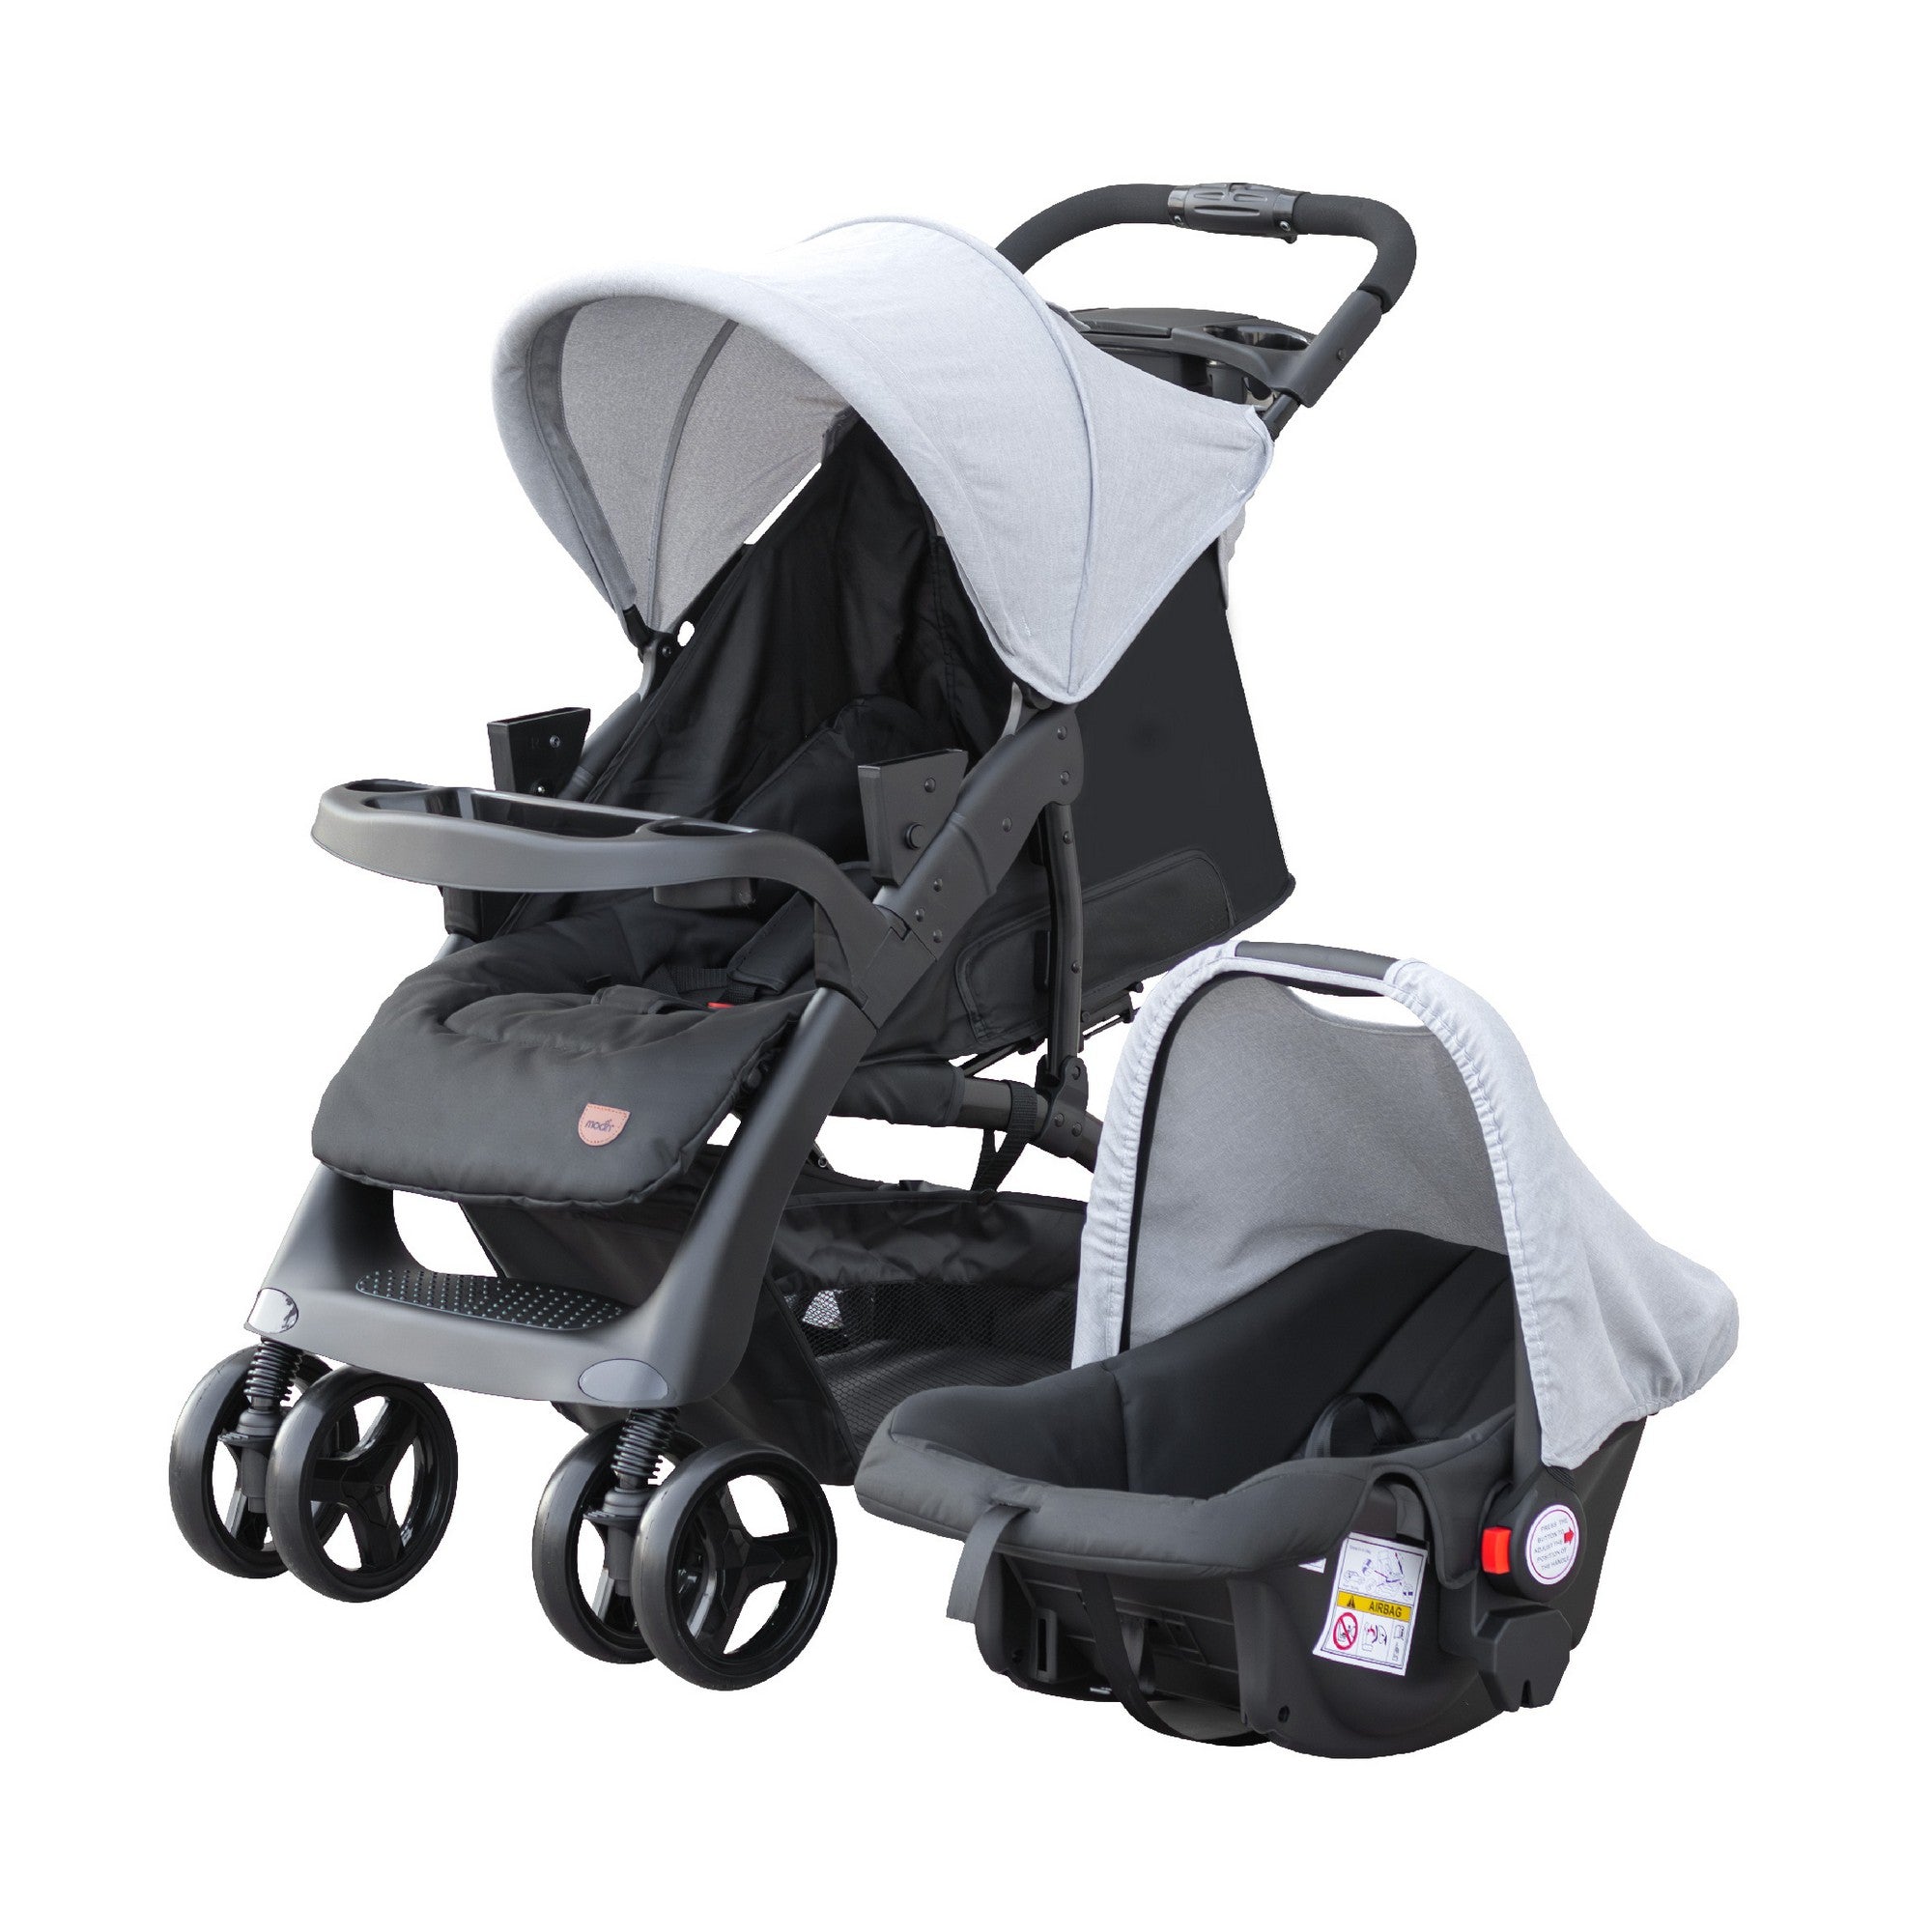 Moon Aria Go Travel System Birth to 15 kg